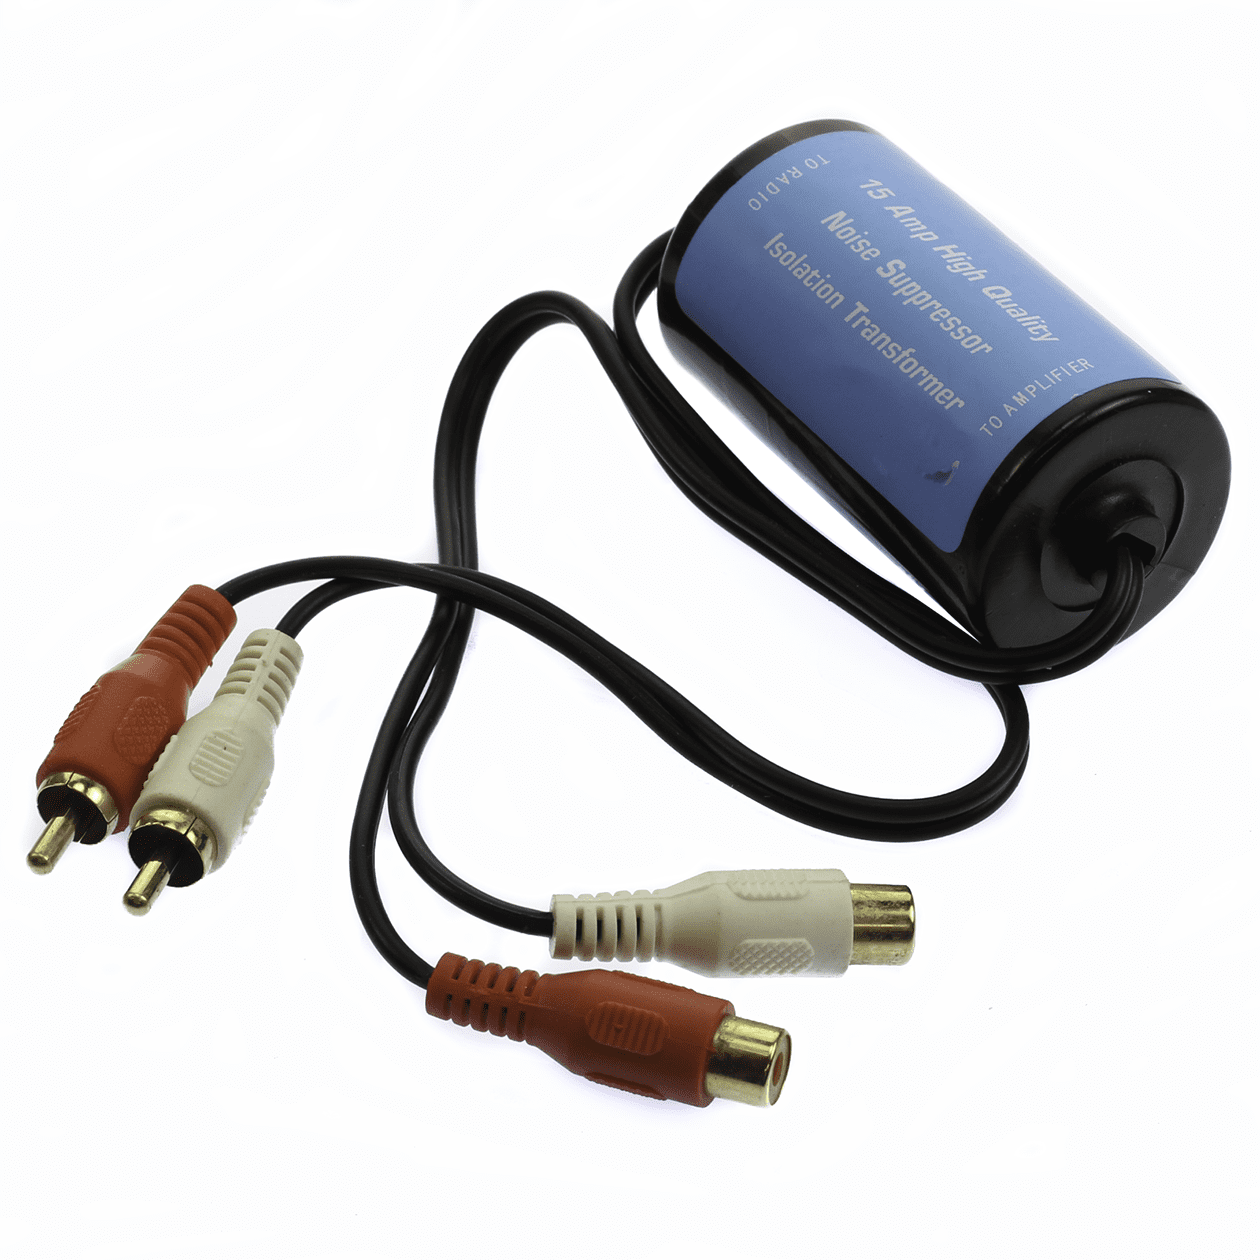 Ground Loop Isolator for Car Audio Systems Eliminates and Stops The Hum Noise! DS18 NF1 Professional RCA Noise Filter 